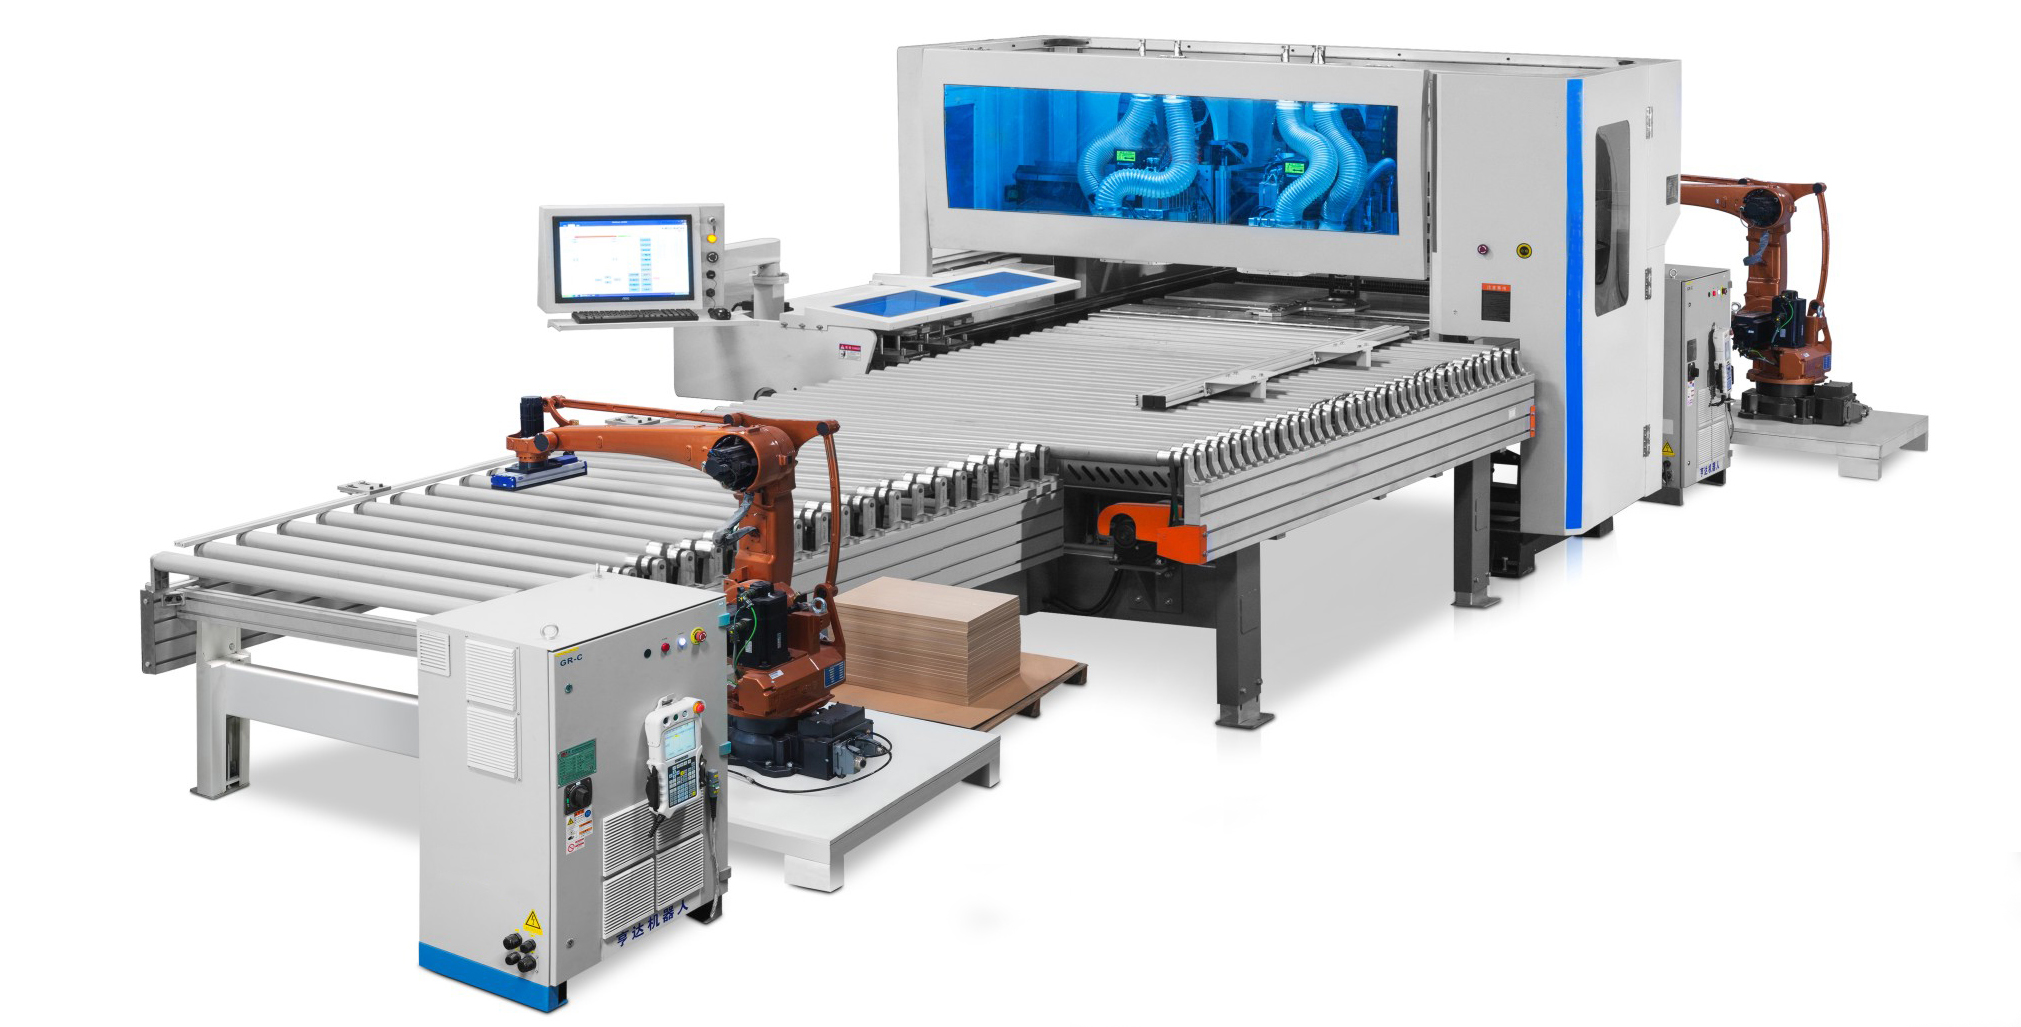 Full automatic CNC Six-sided Drilling and Milling Production Line with Robots